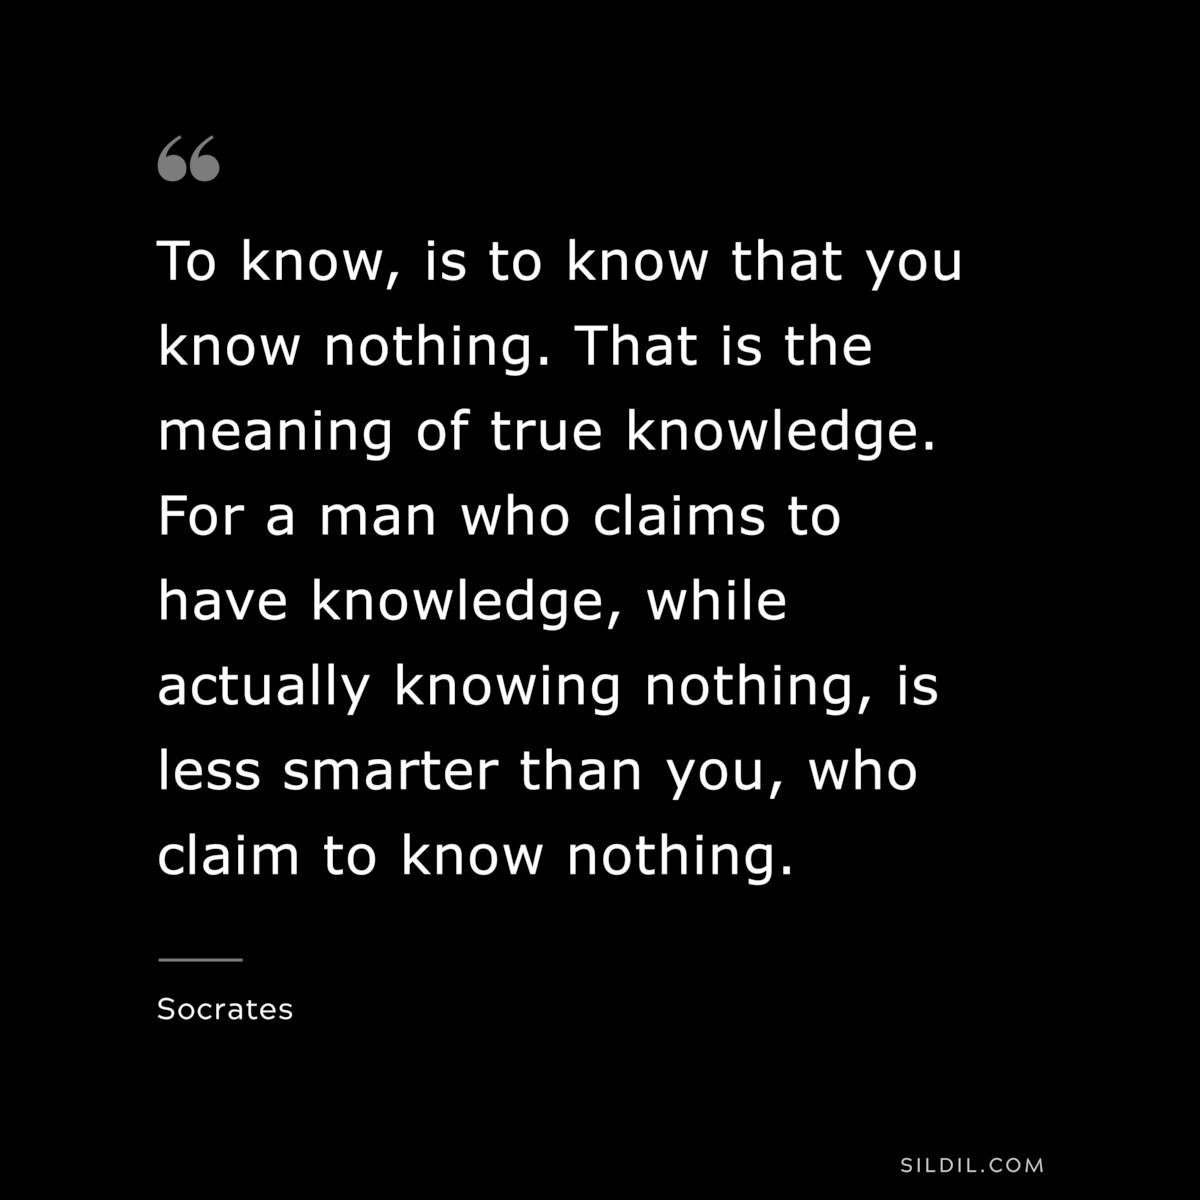 To know, is to know that you know nothing. That is the meaning of true knowledge. For a man who claims to have knowledge, while actually knowing nothing, is less smarter than you, who claim to know nothing. ― Socrates